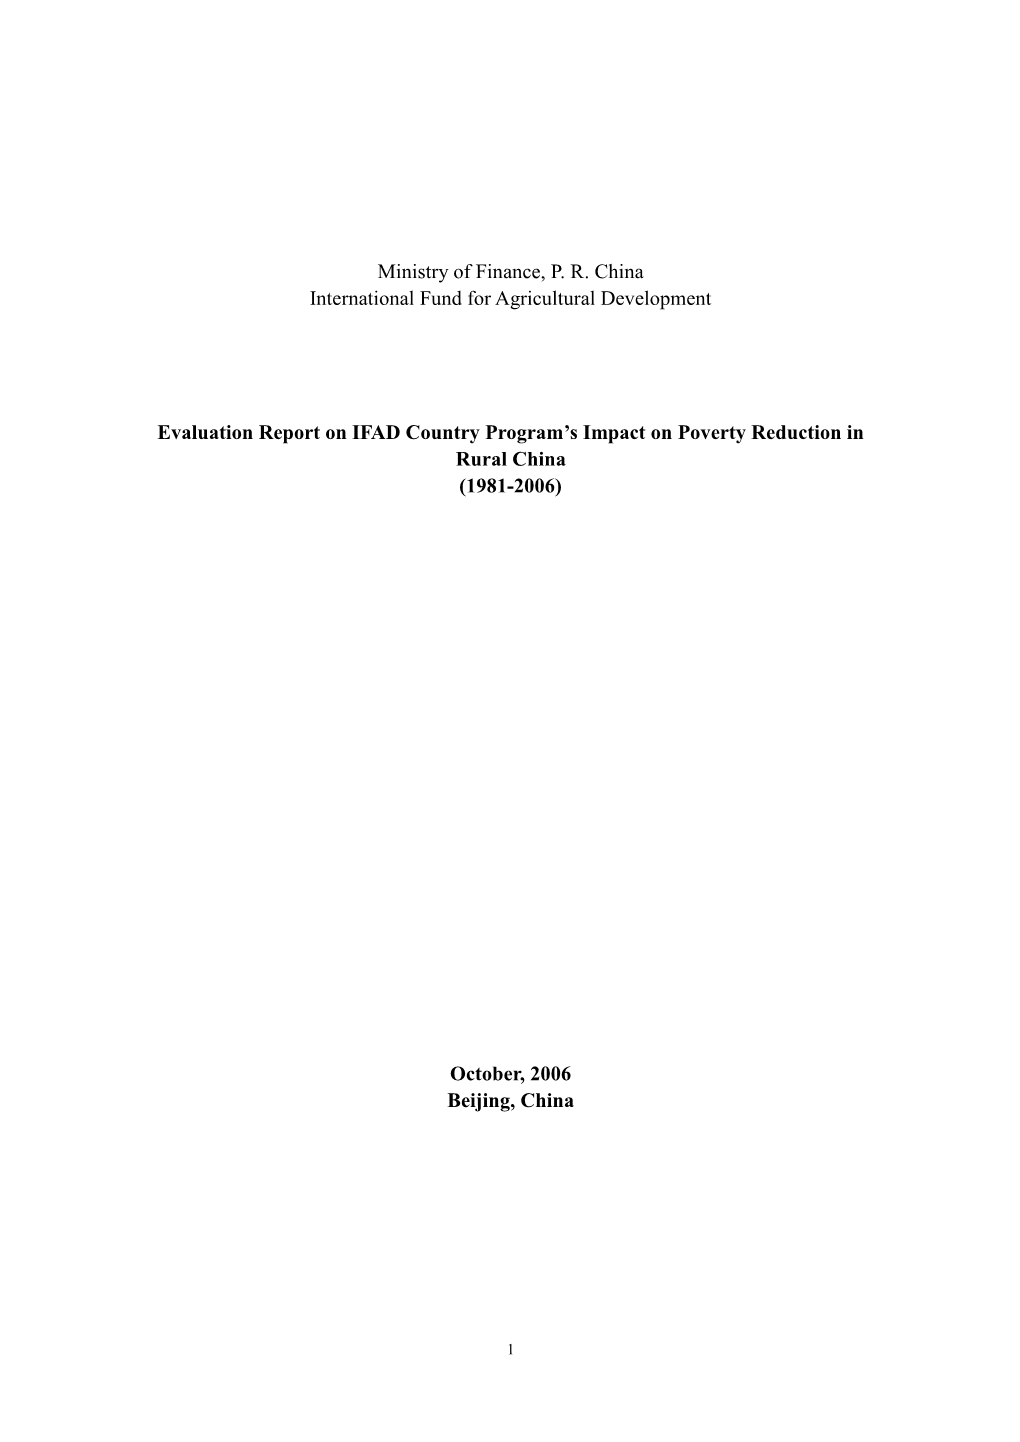 Evaluation Report on IFAD Country Program’S Impact on Poverty Reduction in Rural China (1981-2006)